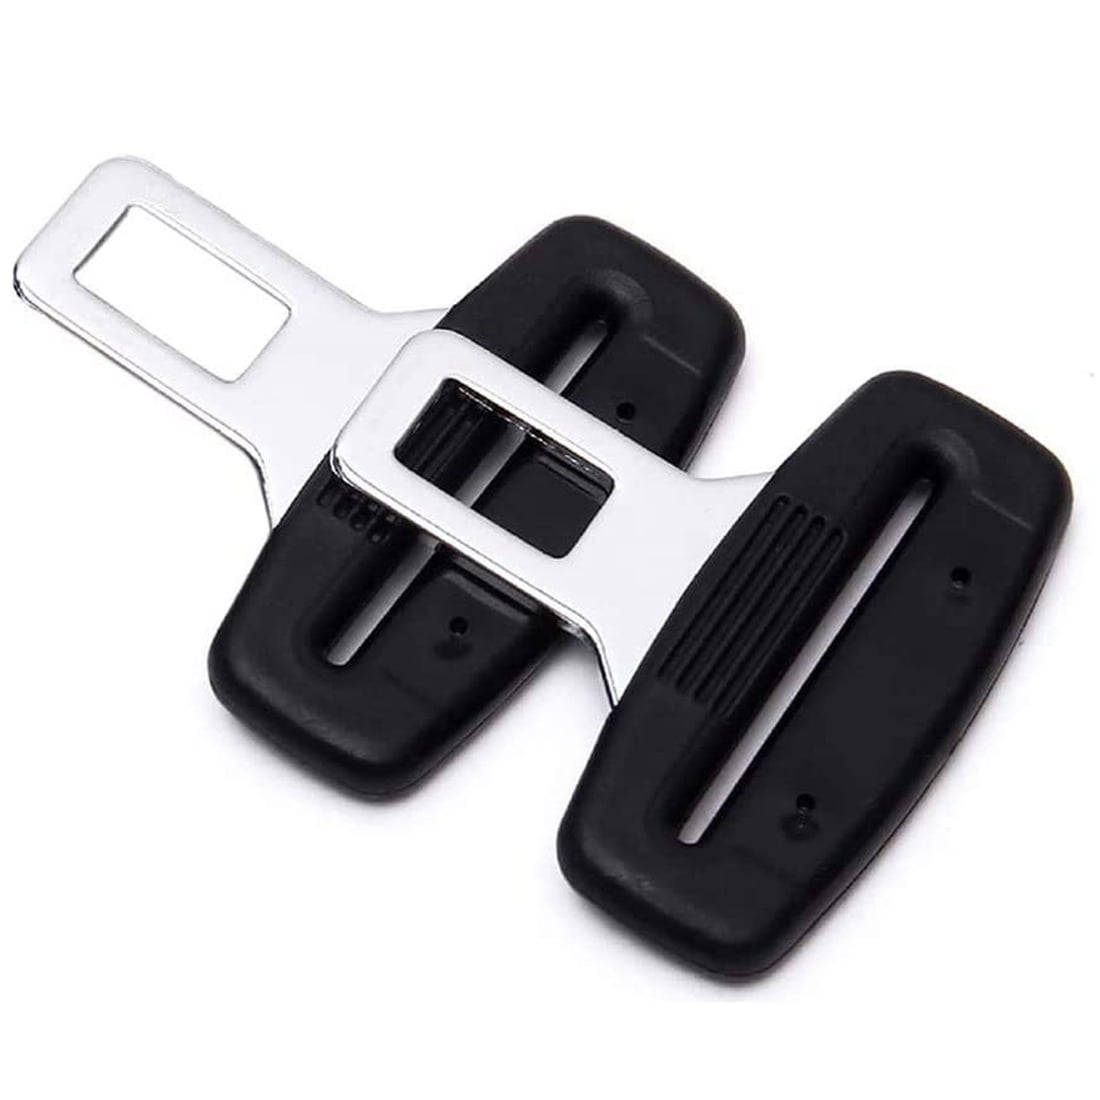 2 Pack Safety Buckle Seat Belt Plug Universal Connector Bayonet Safety with Card Insert Auto Seat Belts Car Parts 